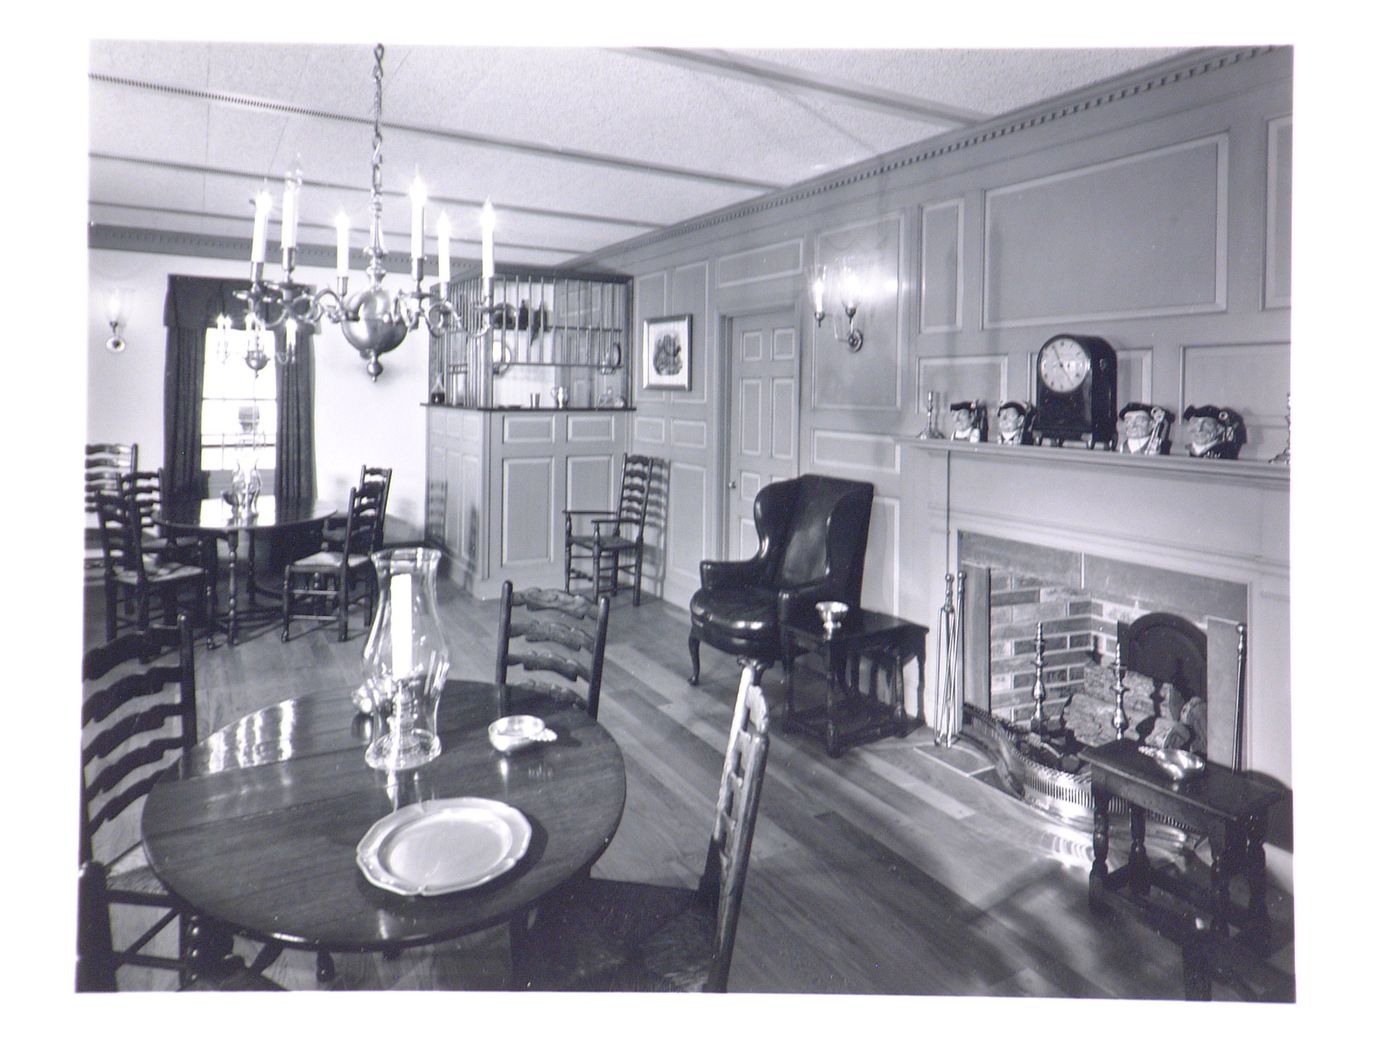 Interior view of a room with a fireplace, Hartford National Bank and Trust Company building, Hartford, Connecticut, United States